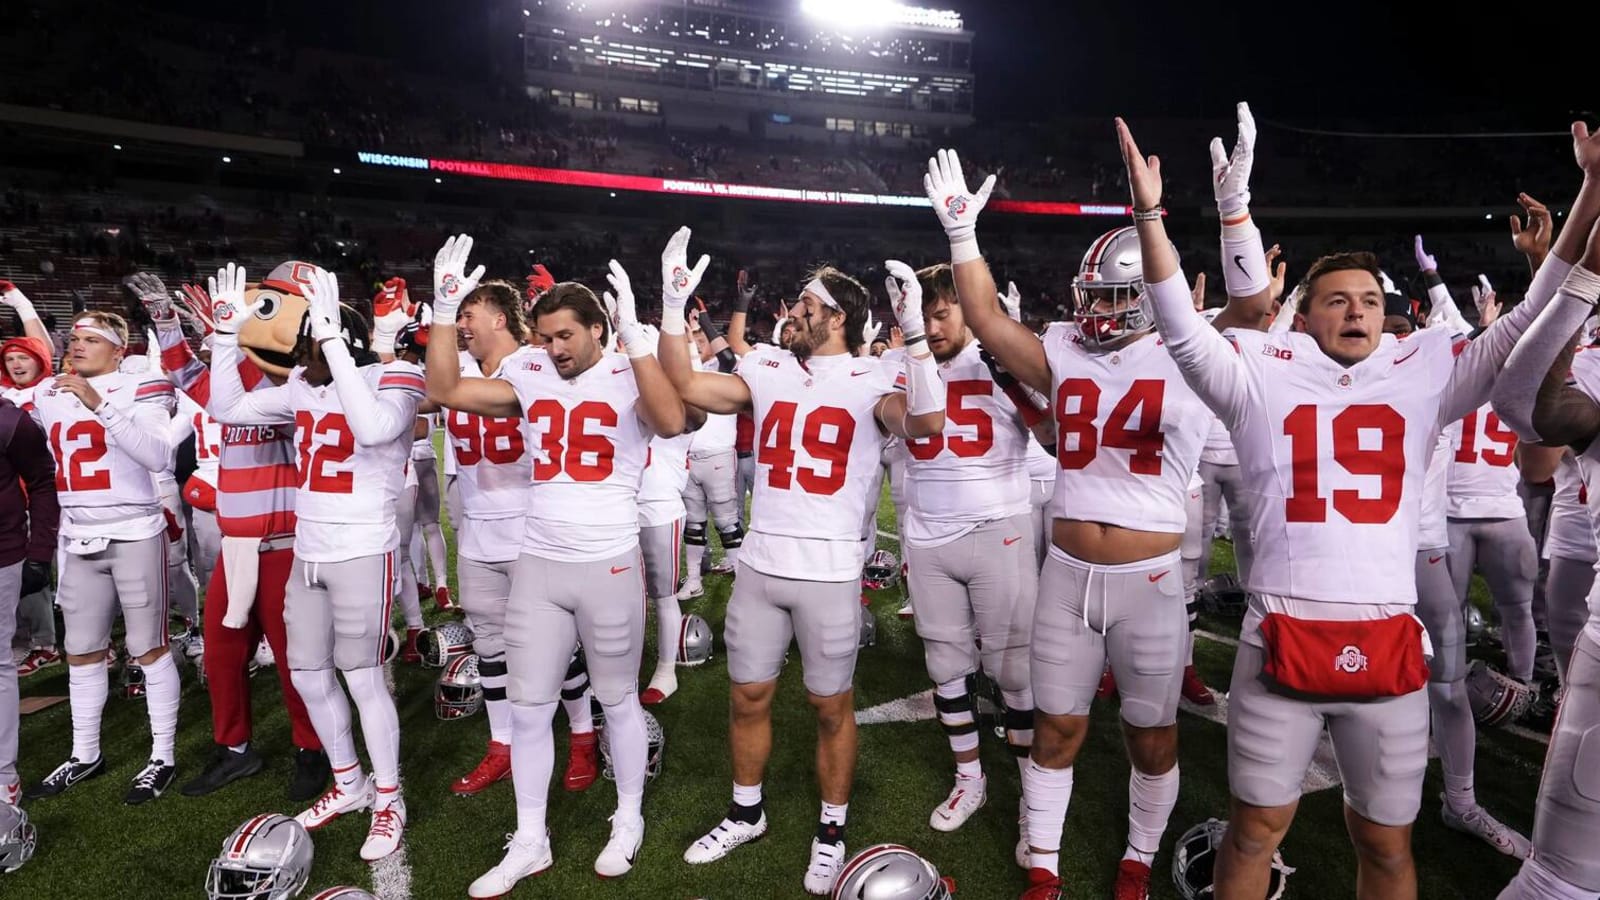 Ohio State tops first CFP rankings as new teams make an appearance